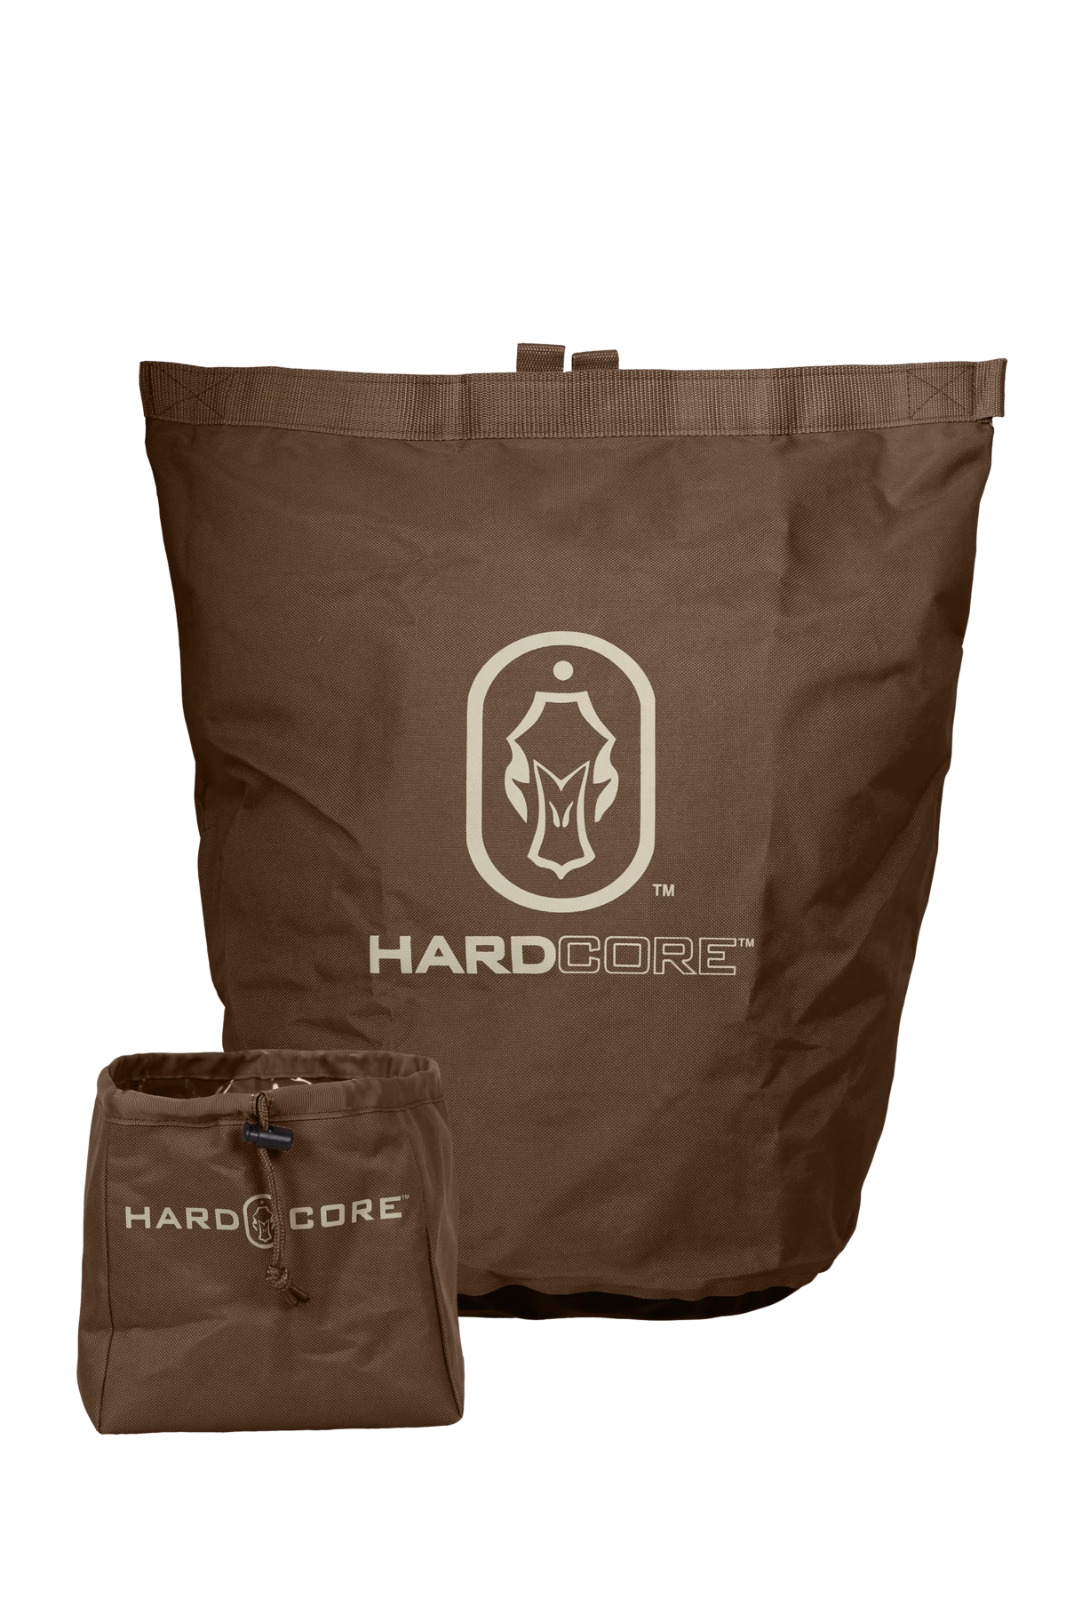 New Hardcore Heavy Duty Dog Food Dry Bag Bowl Combo Outdoor Petcare 560